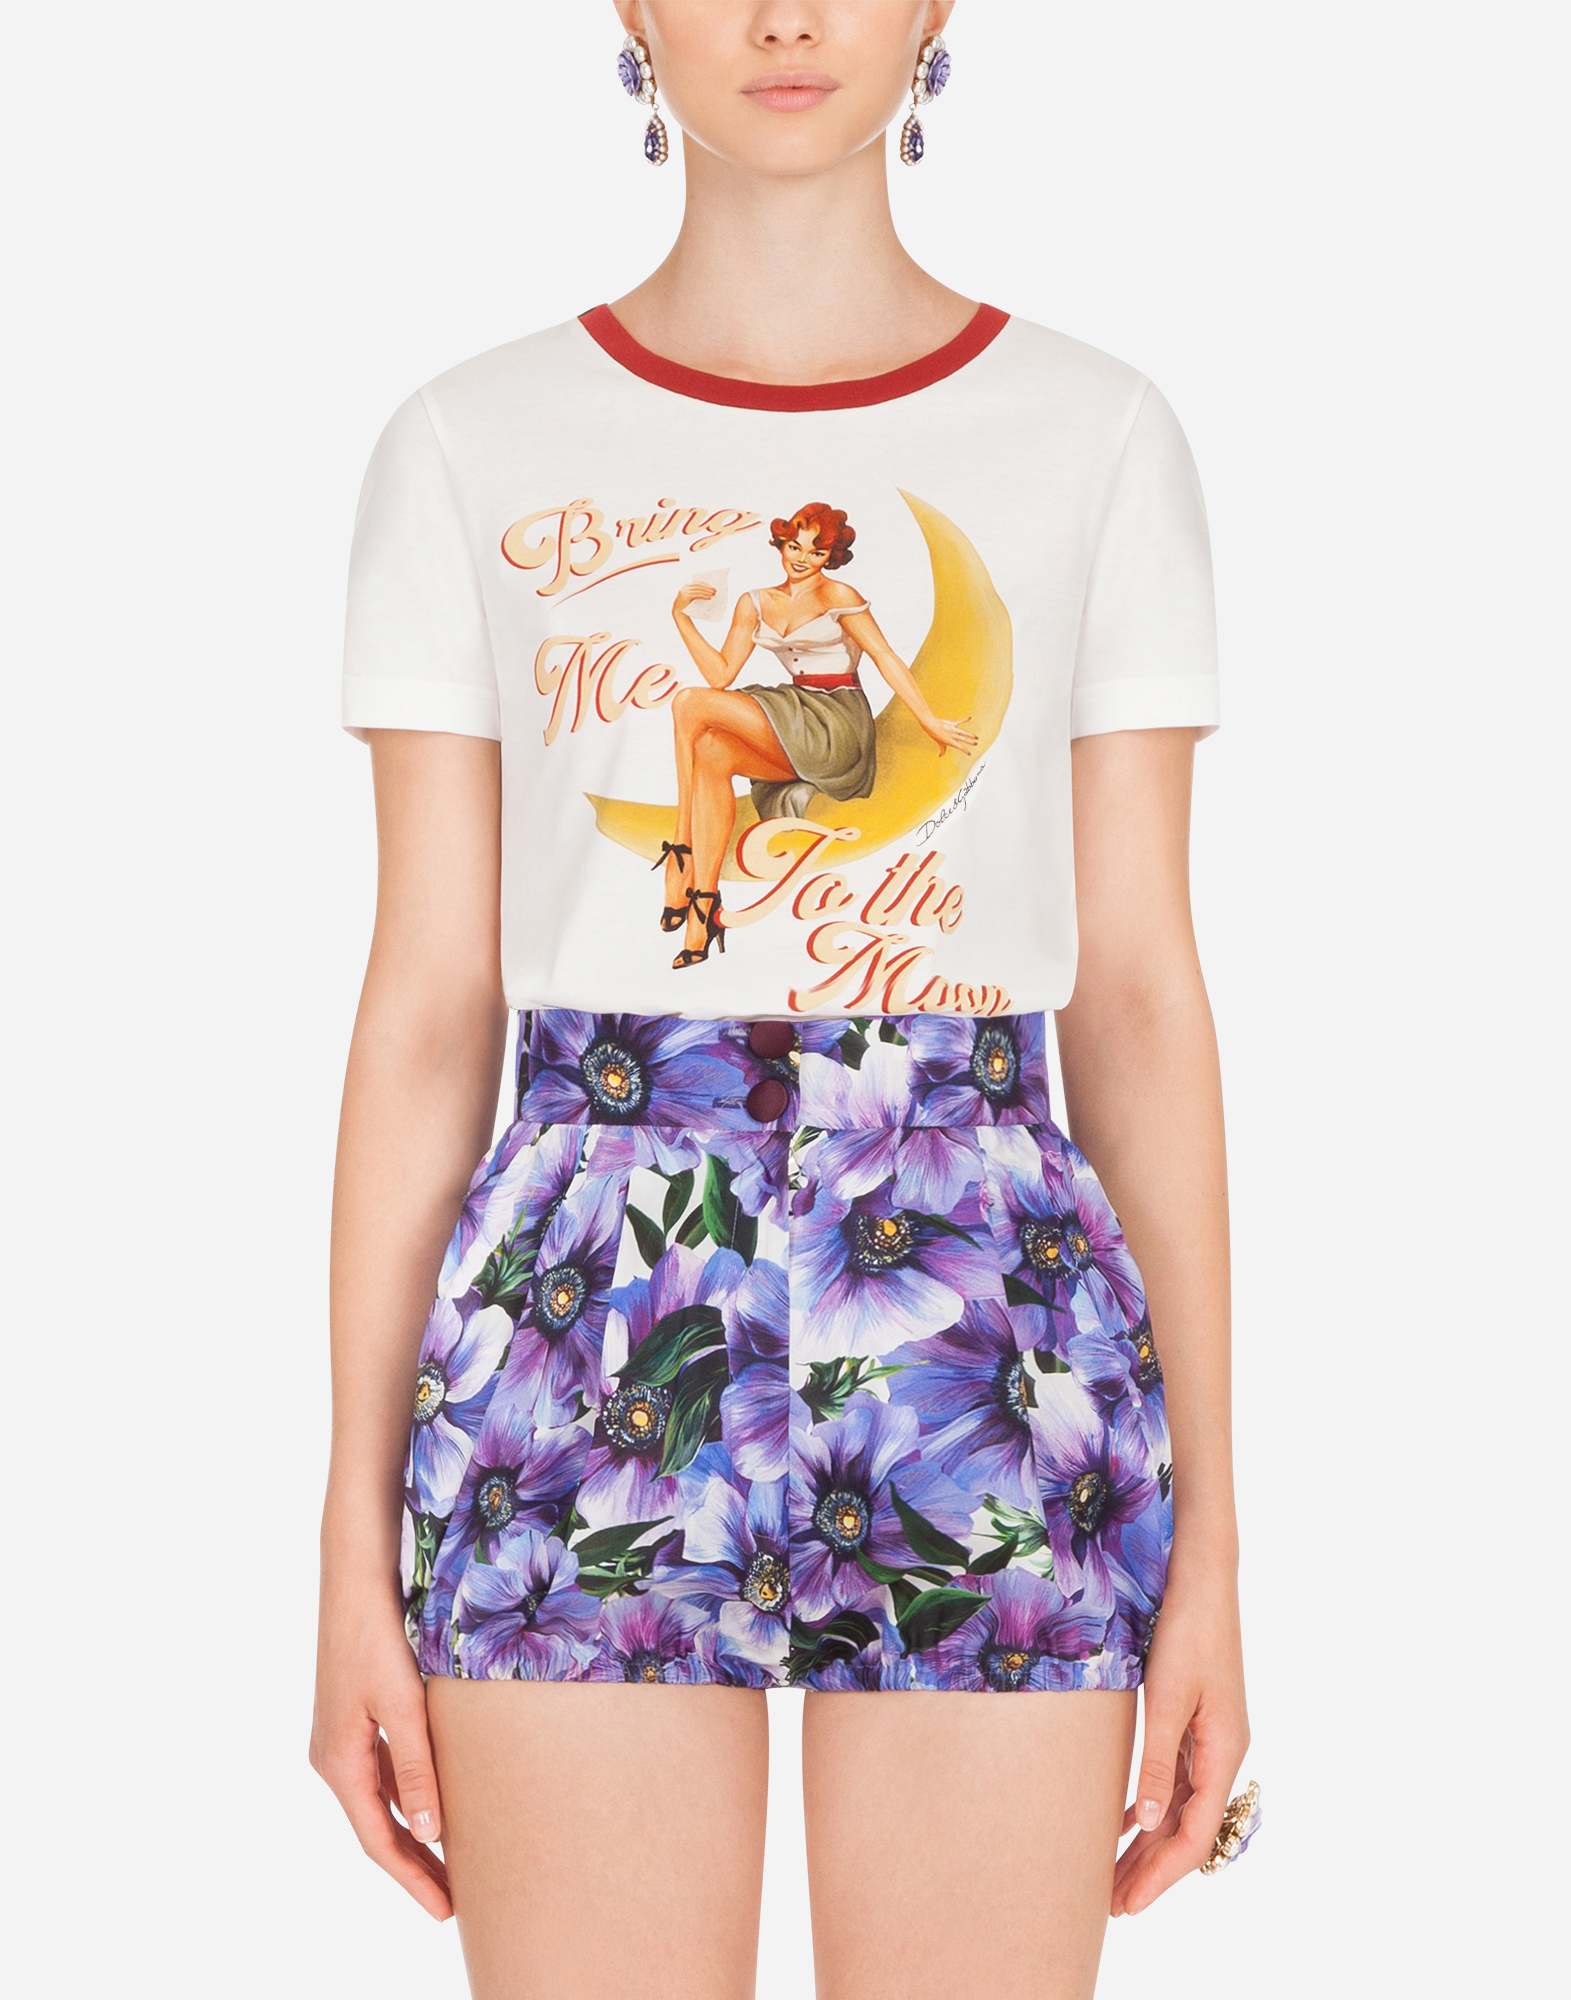 DOLCE & GABBANA SHORT-SLEEVED JERSEY T-SHIRT WITH BRING ME TO THE MOON PRINT